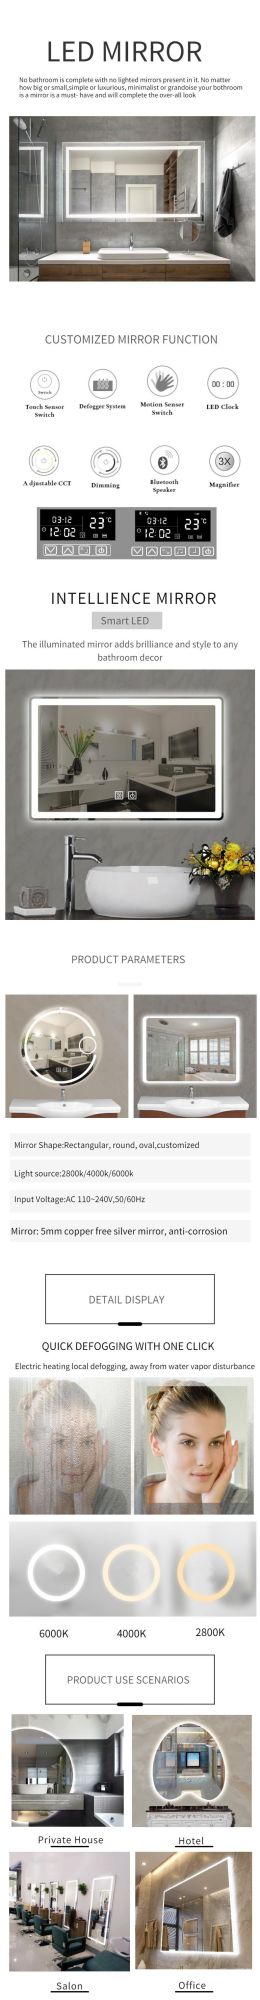 Bathroom Smart LED Lighted Design Mirror Wall Decorative Makeup Mirror with Touch Screen